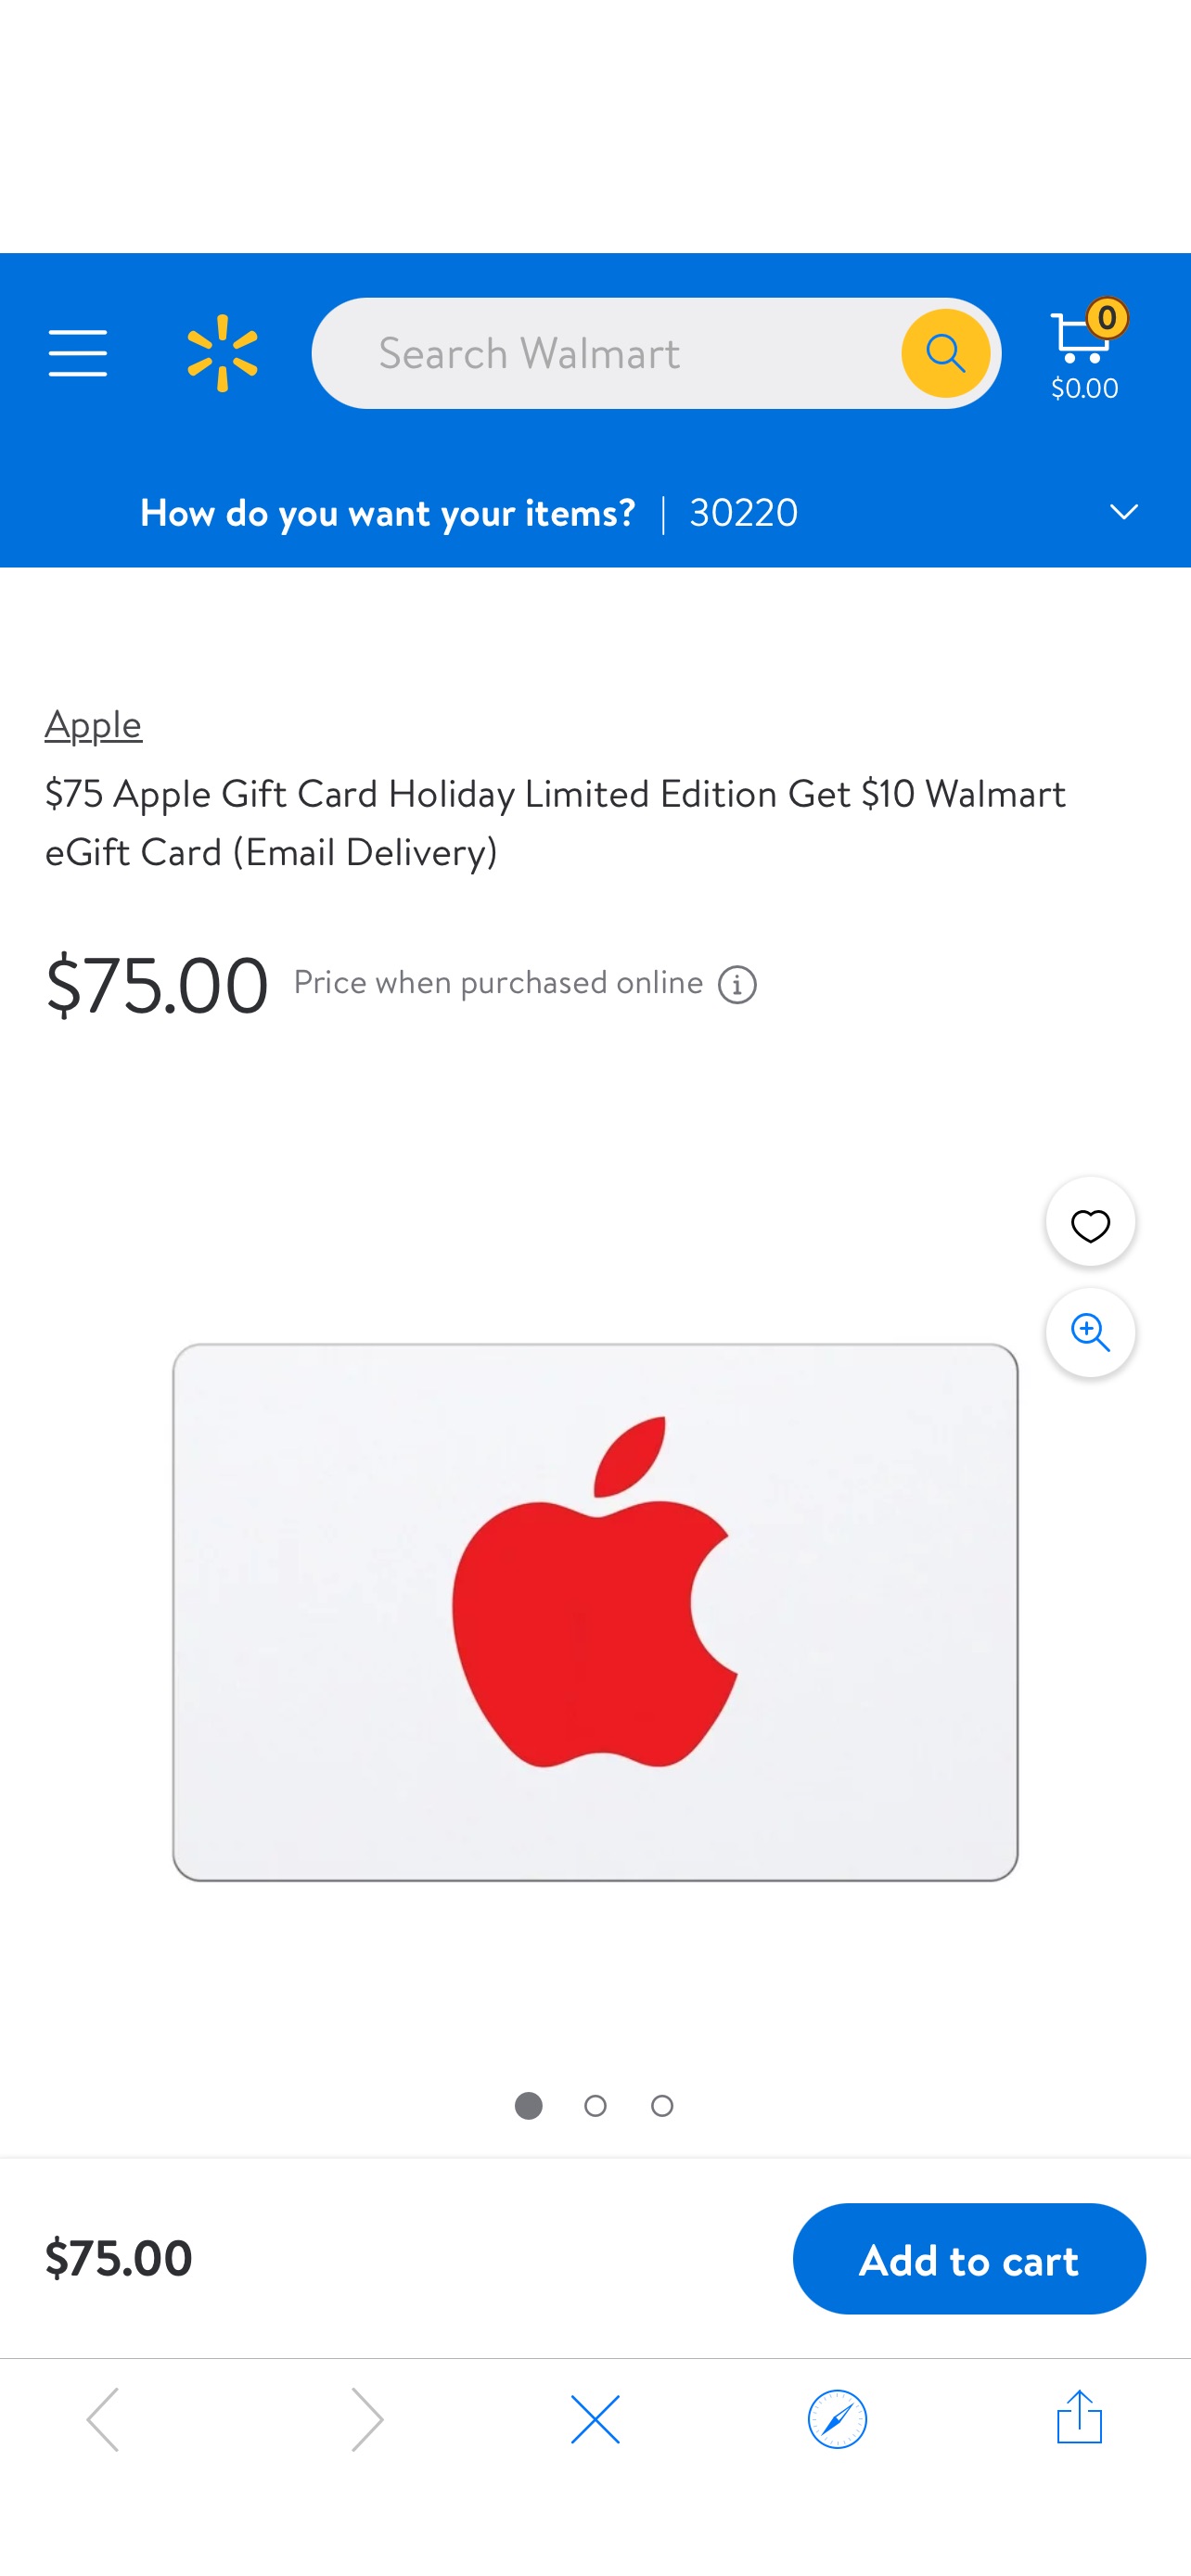 $75 Apple Gift Card Holiday Limited Edition Get $10 Walmart eGift Card (Email Delivery) - Walmart.com 送10元礼卡